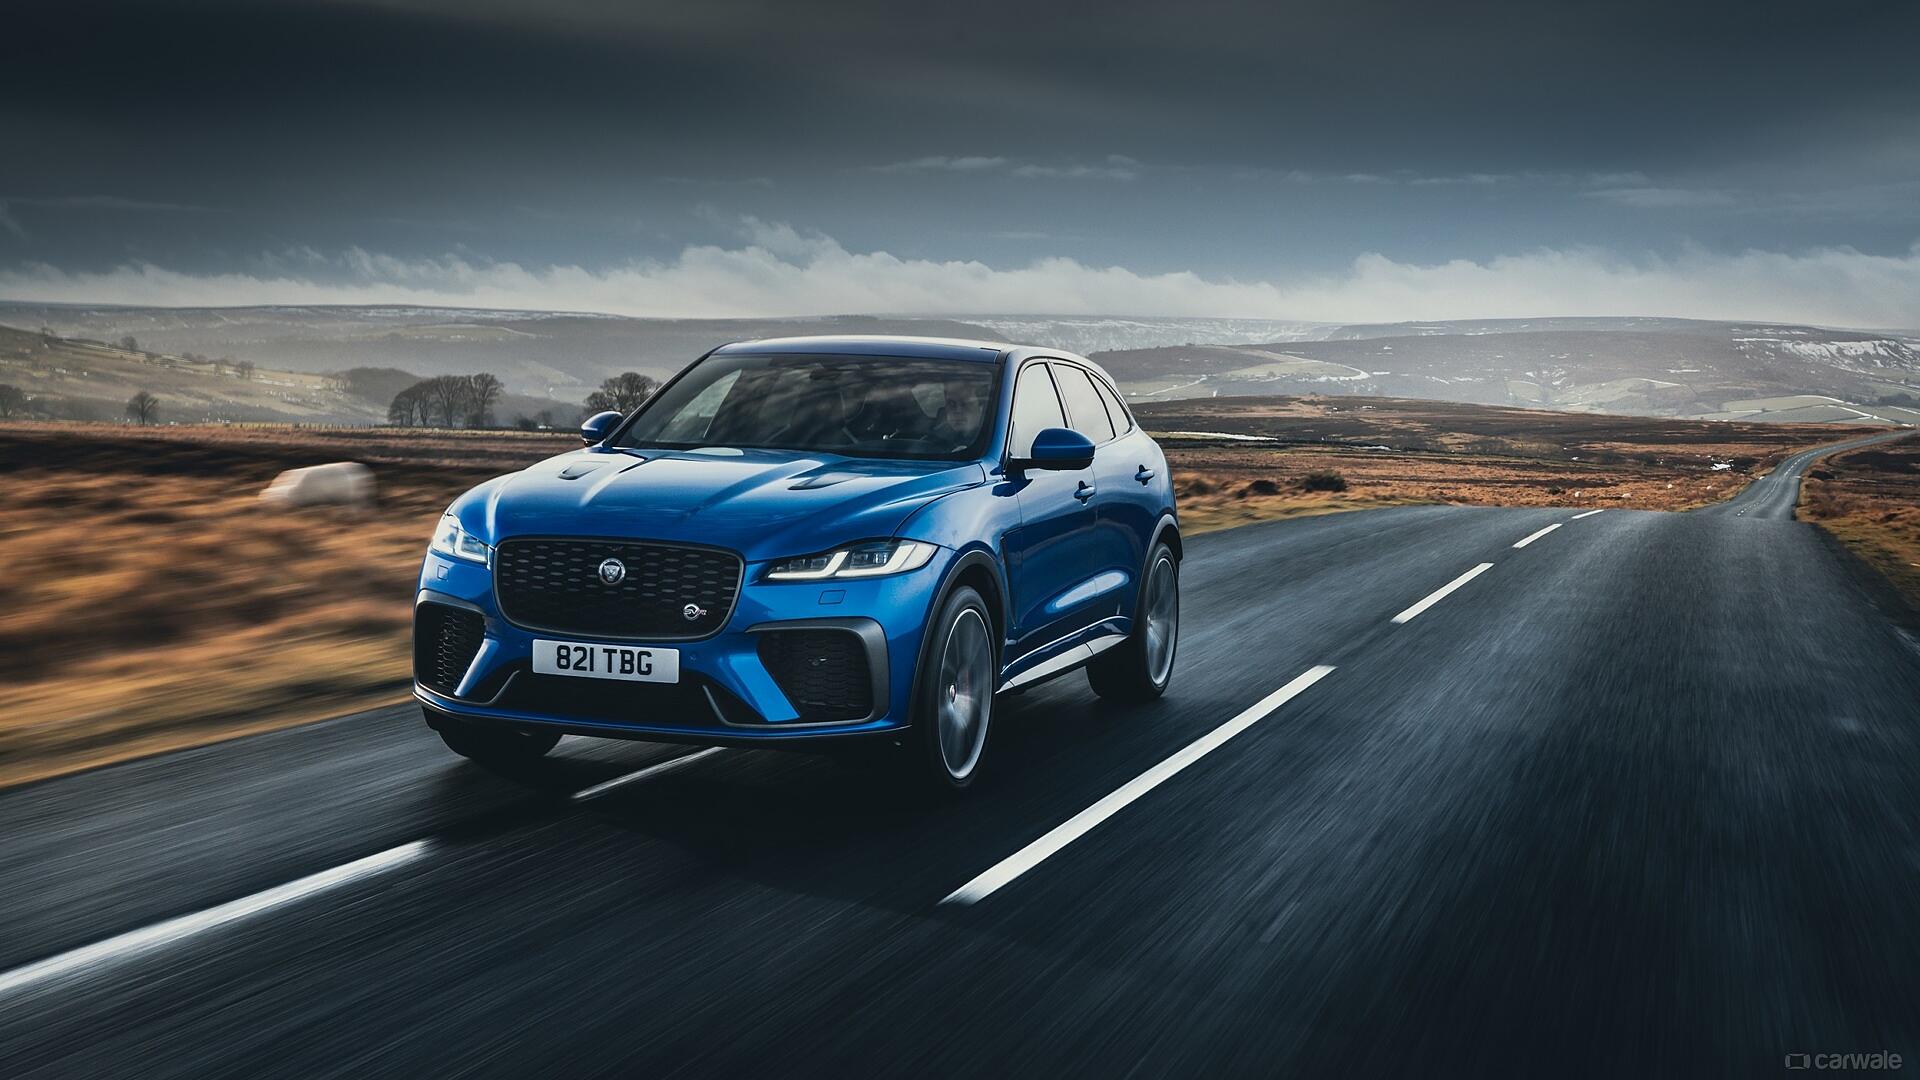 New Jaguar F-Pace SVR launched in India at Rs 1.51 crore